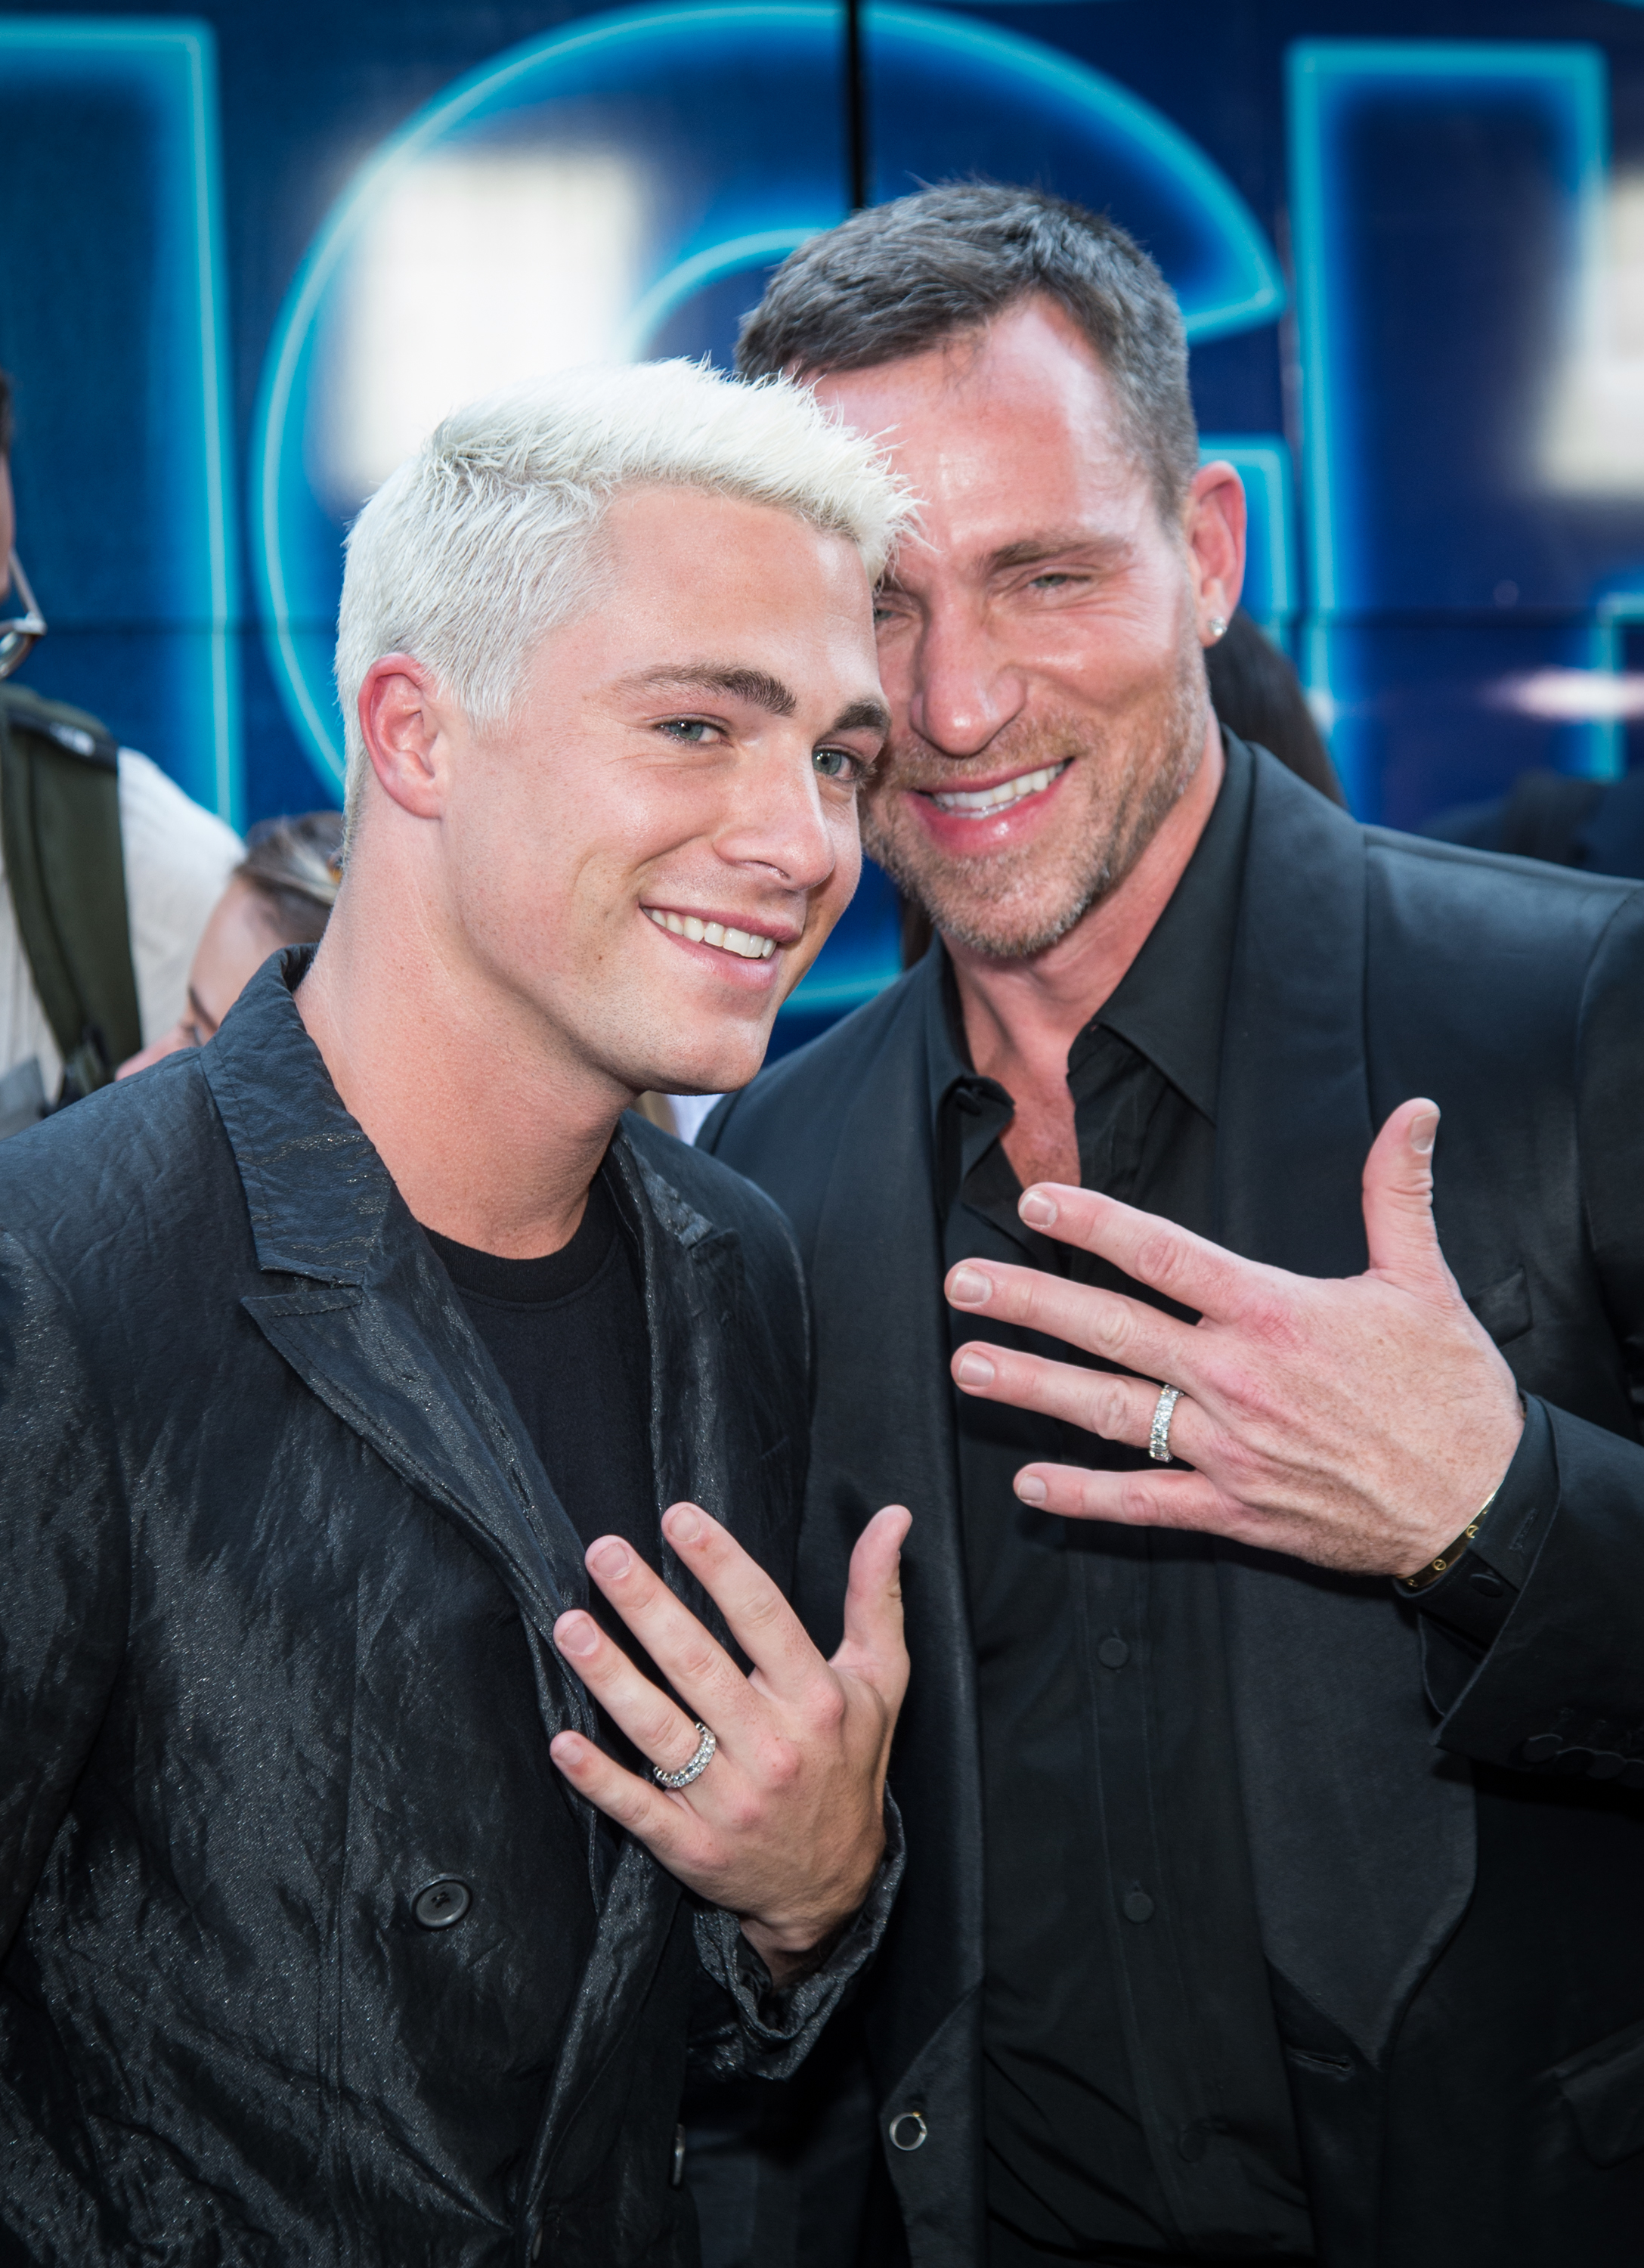 Colton Haynes and Jeff Leatham on the red carpet showing off their wedding rings